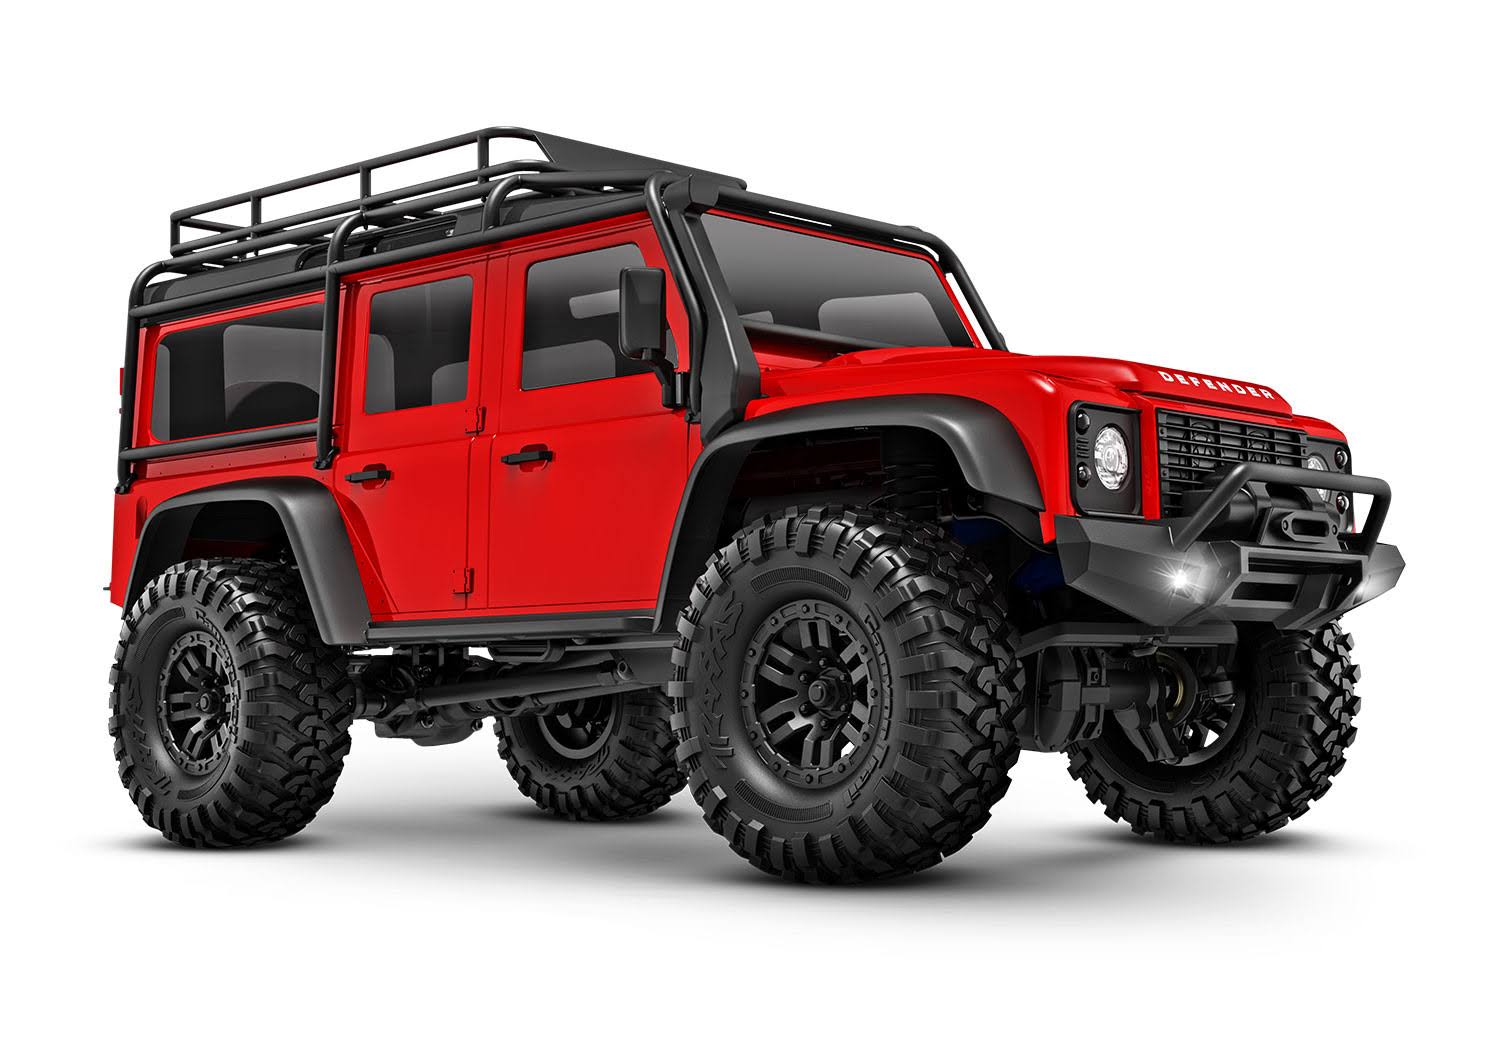 Traxxas TRX-4M Land Rover Defender 1:18 4x4 Electric Trail Crawler, Red